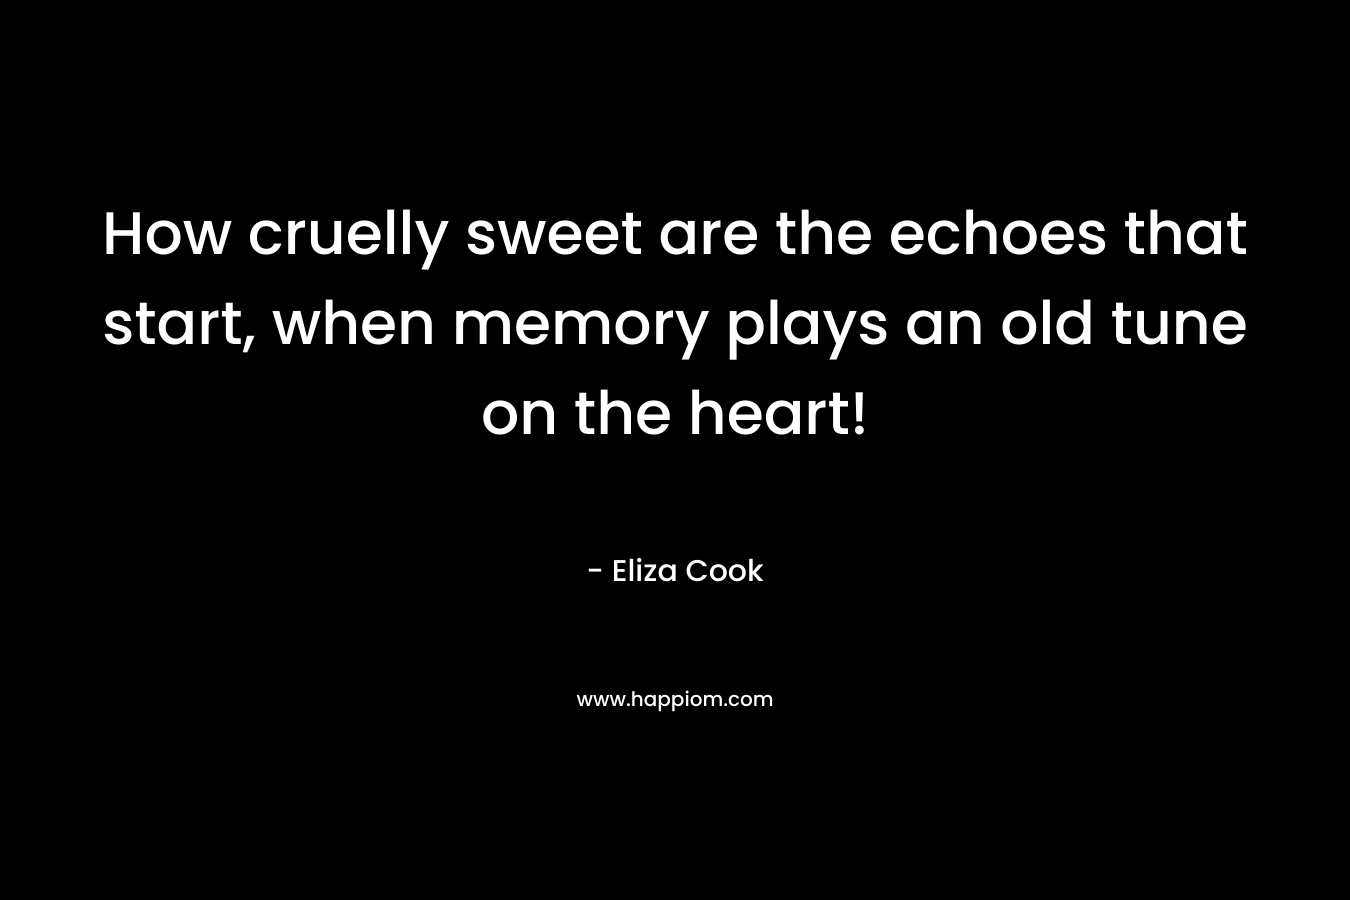 How cruelly sweet are the echoes that start, when memory plays an old tune on the heart!